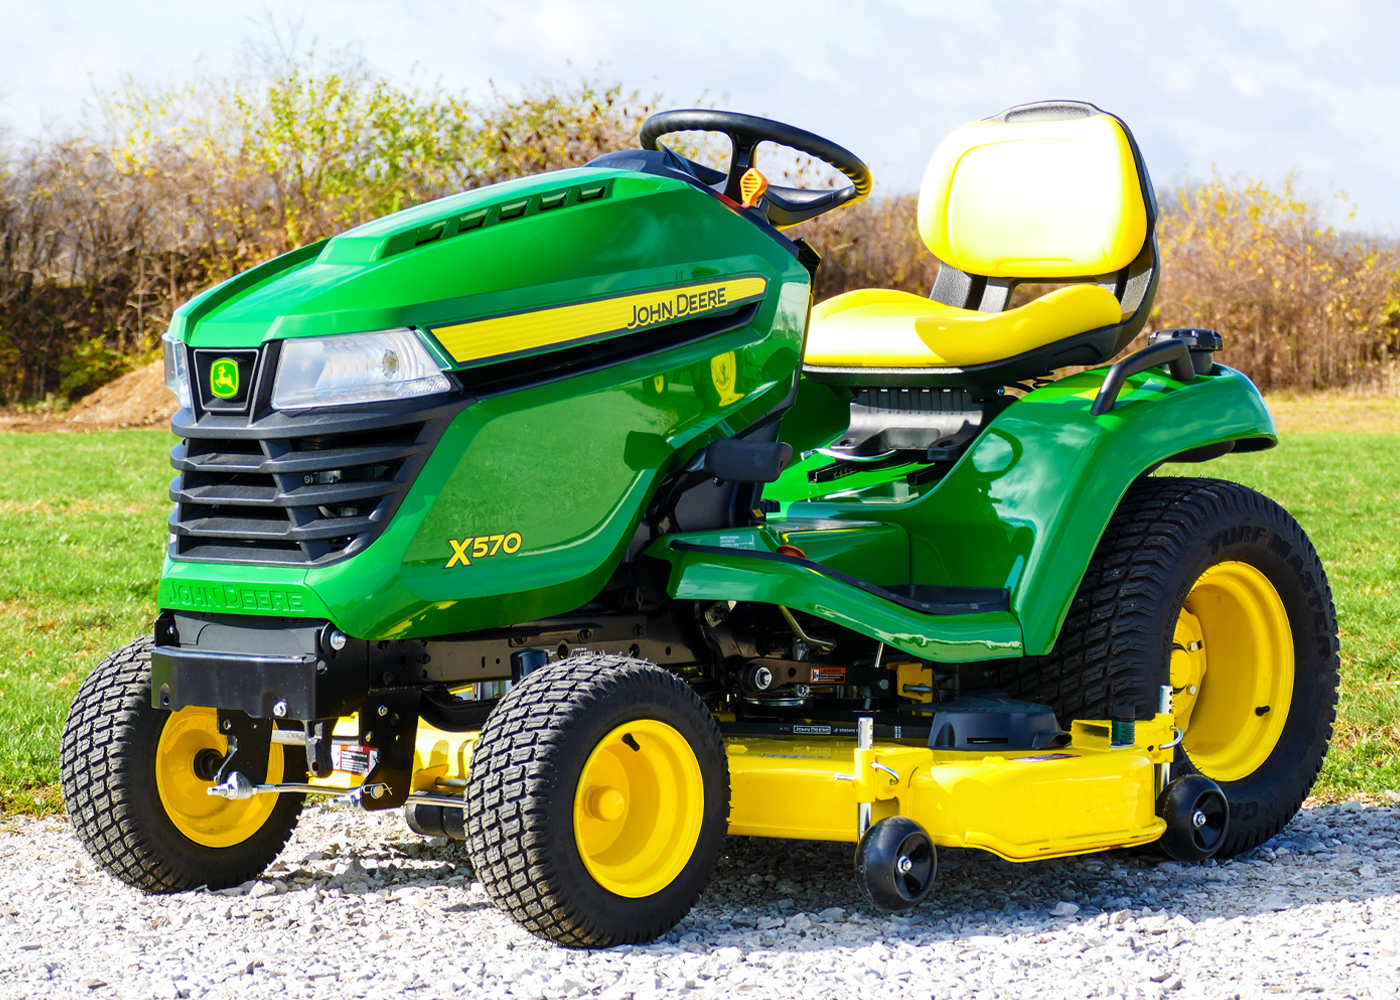 X570 Lawn Tractor With 48 Inch Deck